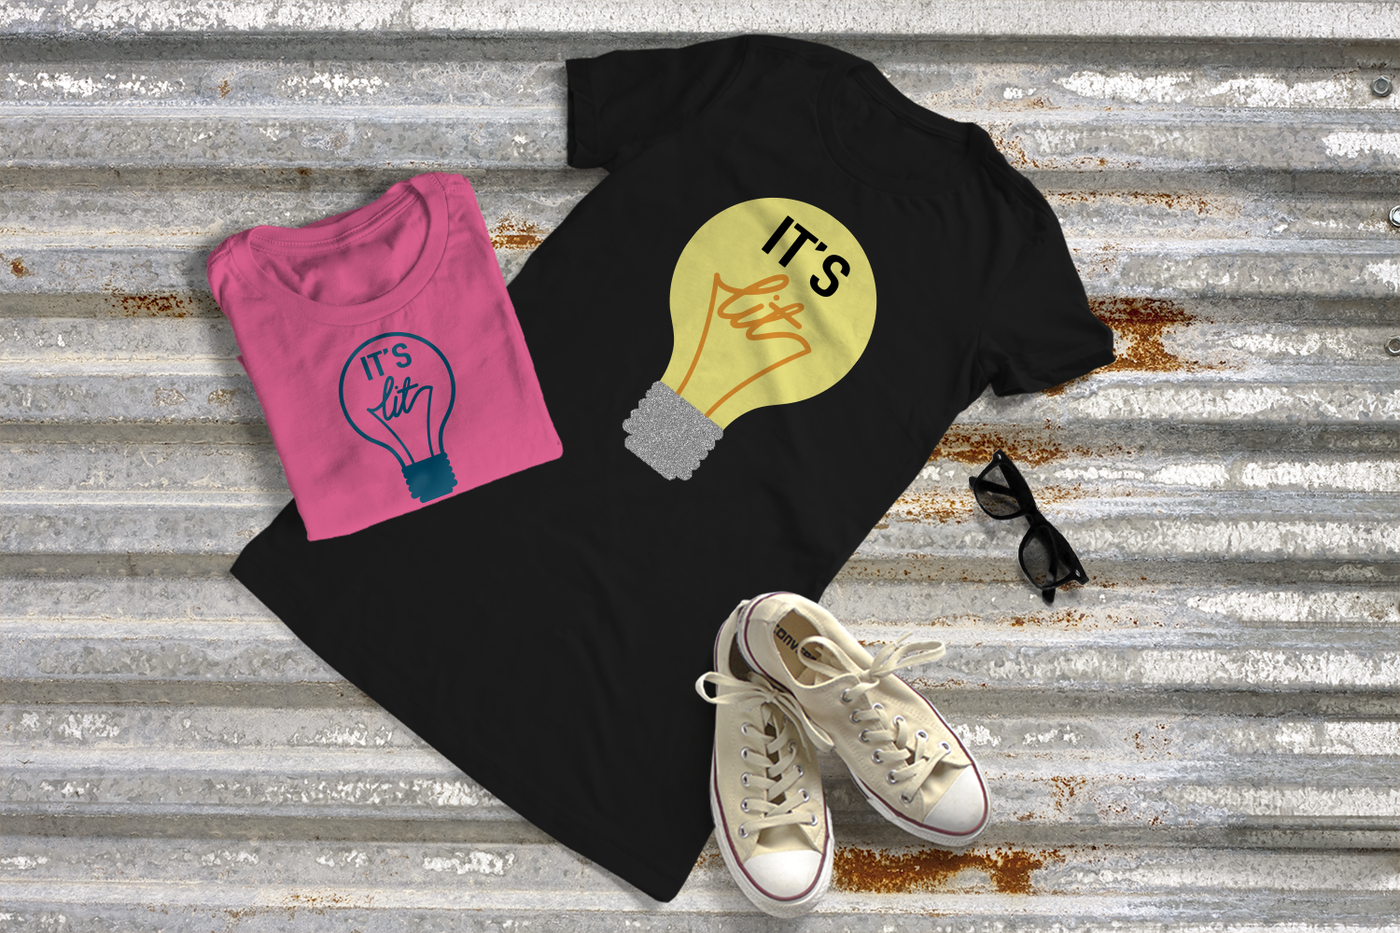 Two tees with a light bulb design. Light bulb says "It's lit" inside.